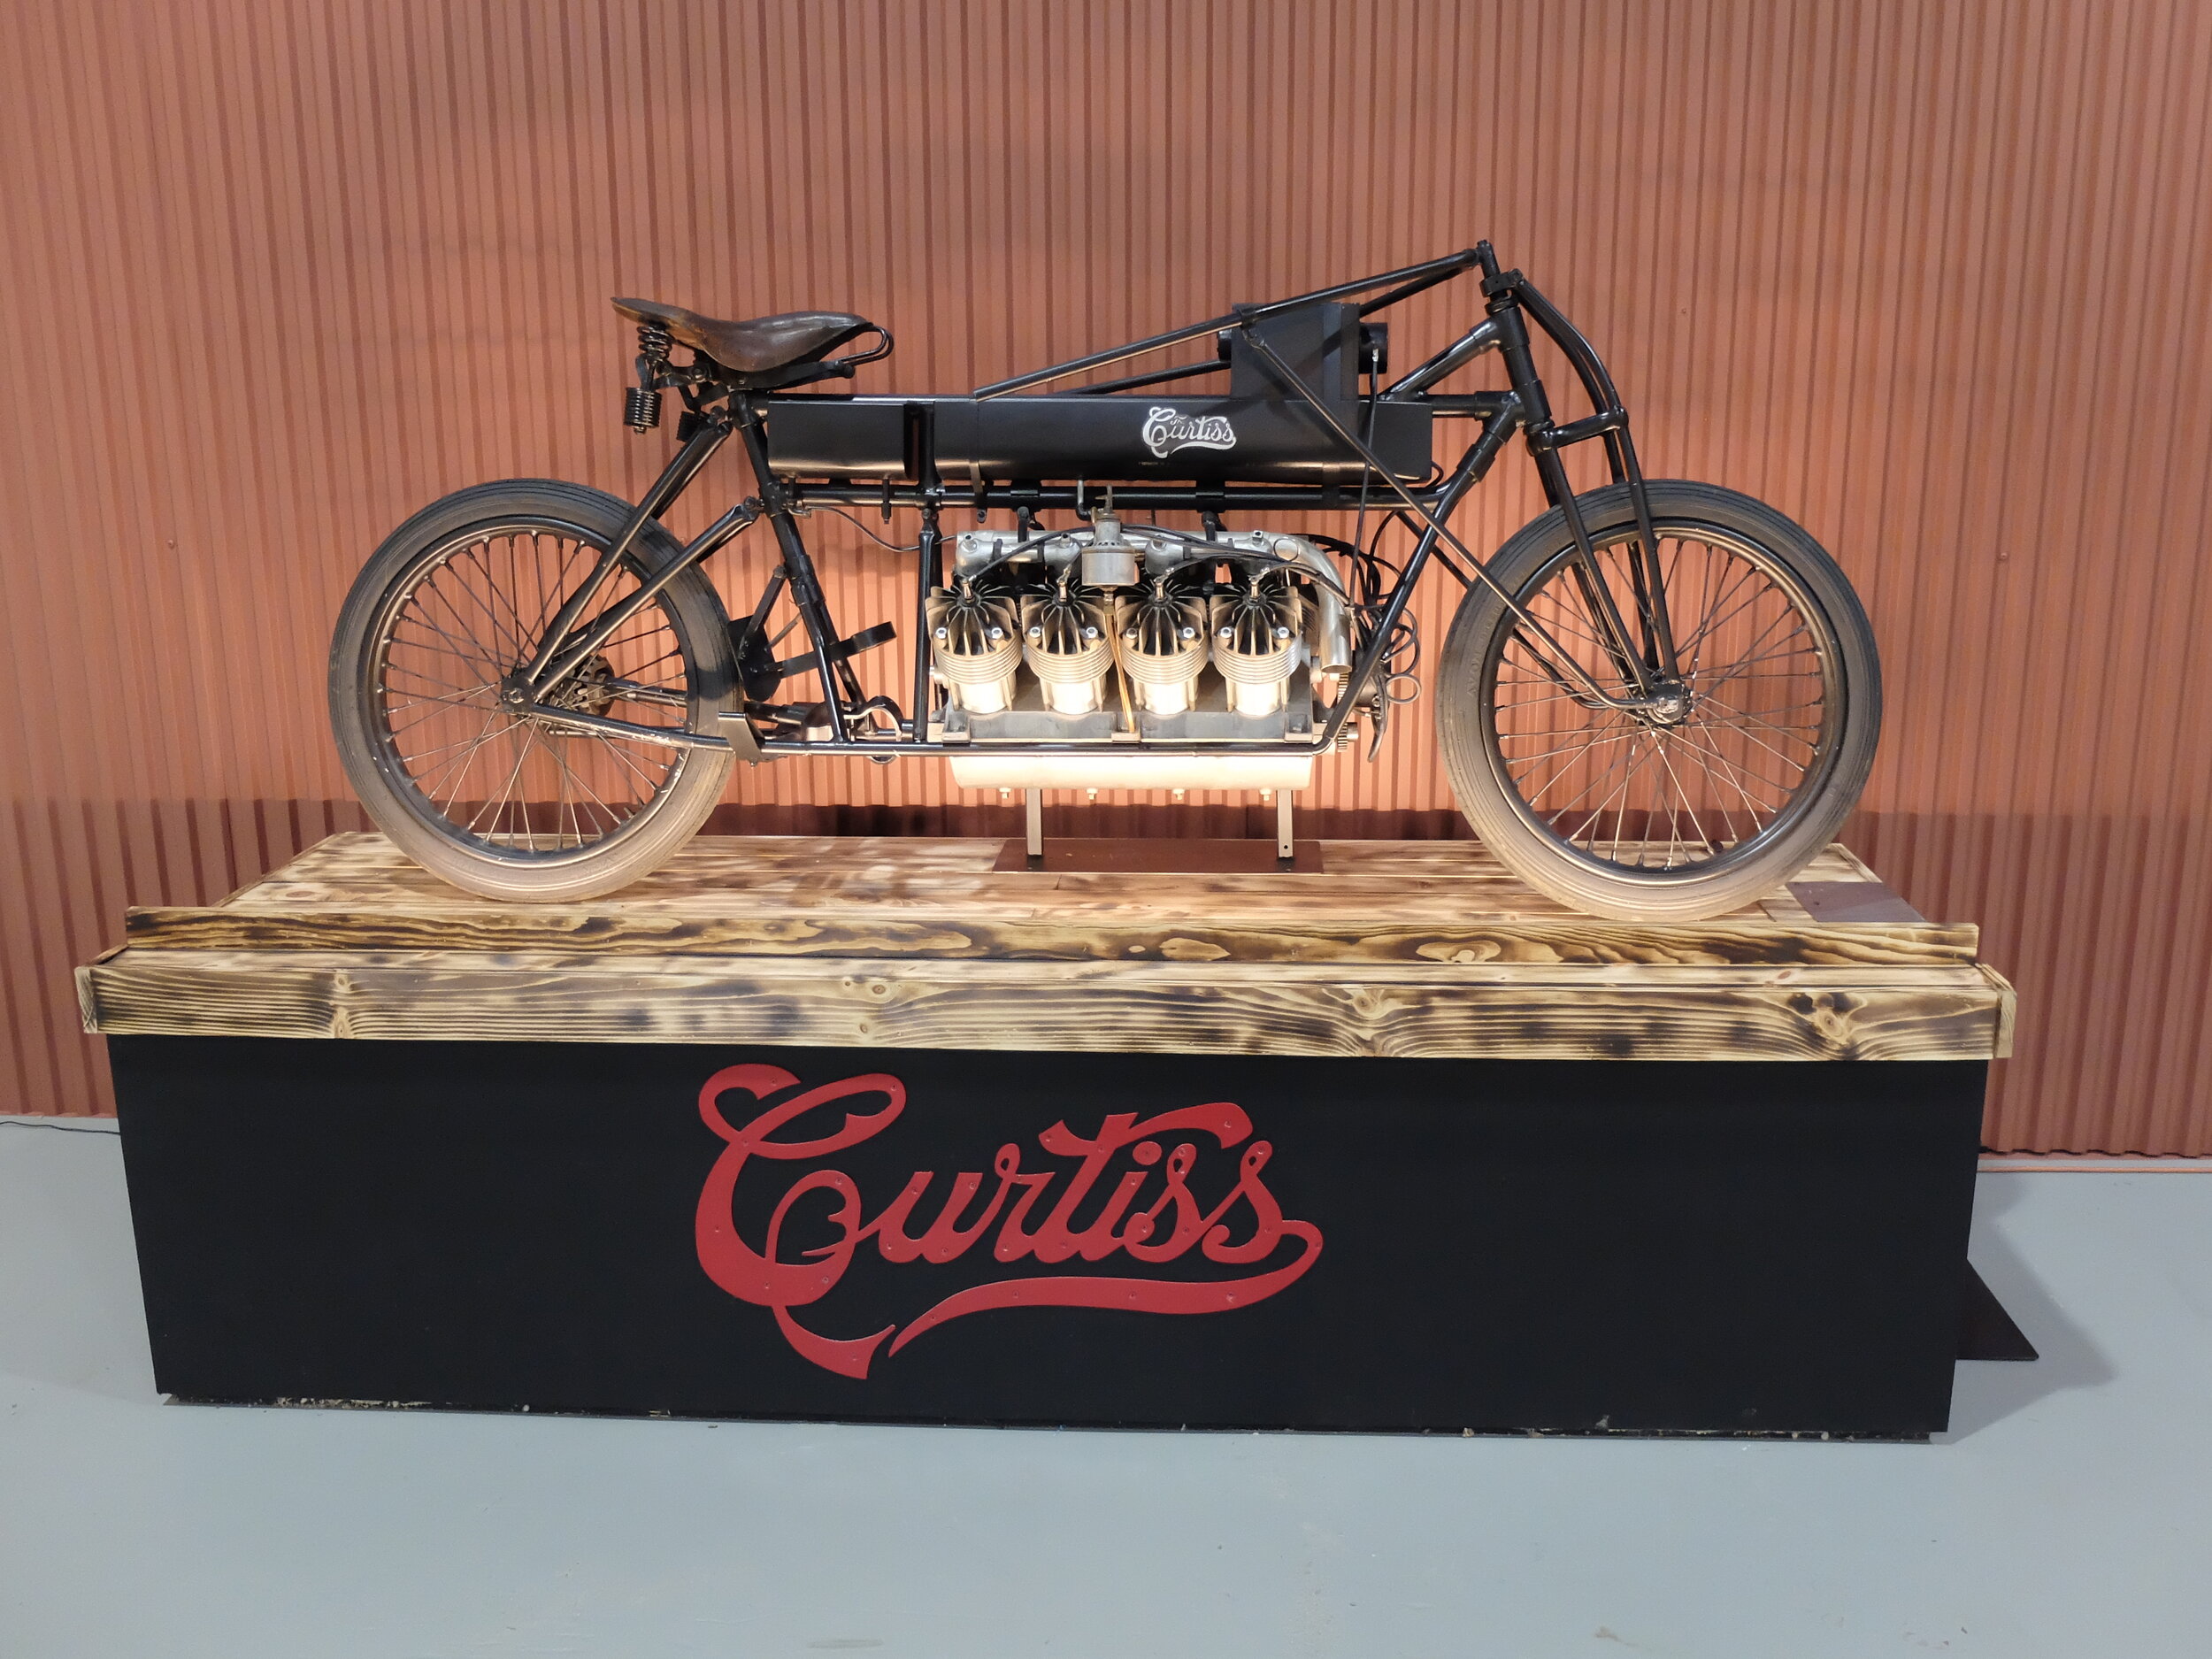  …. this V8 engine-powered motorcycle.  On it Curtiss set an unofficial land speed record of 136.3. His wife was worried so he gave up motorcycle racing for something safer,... 